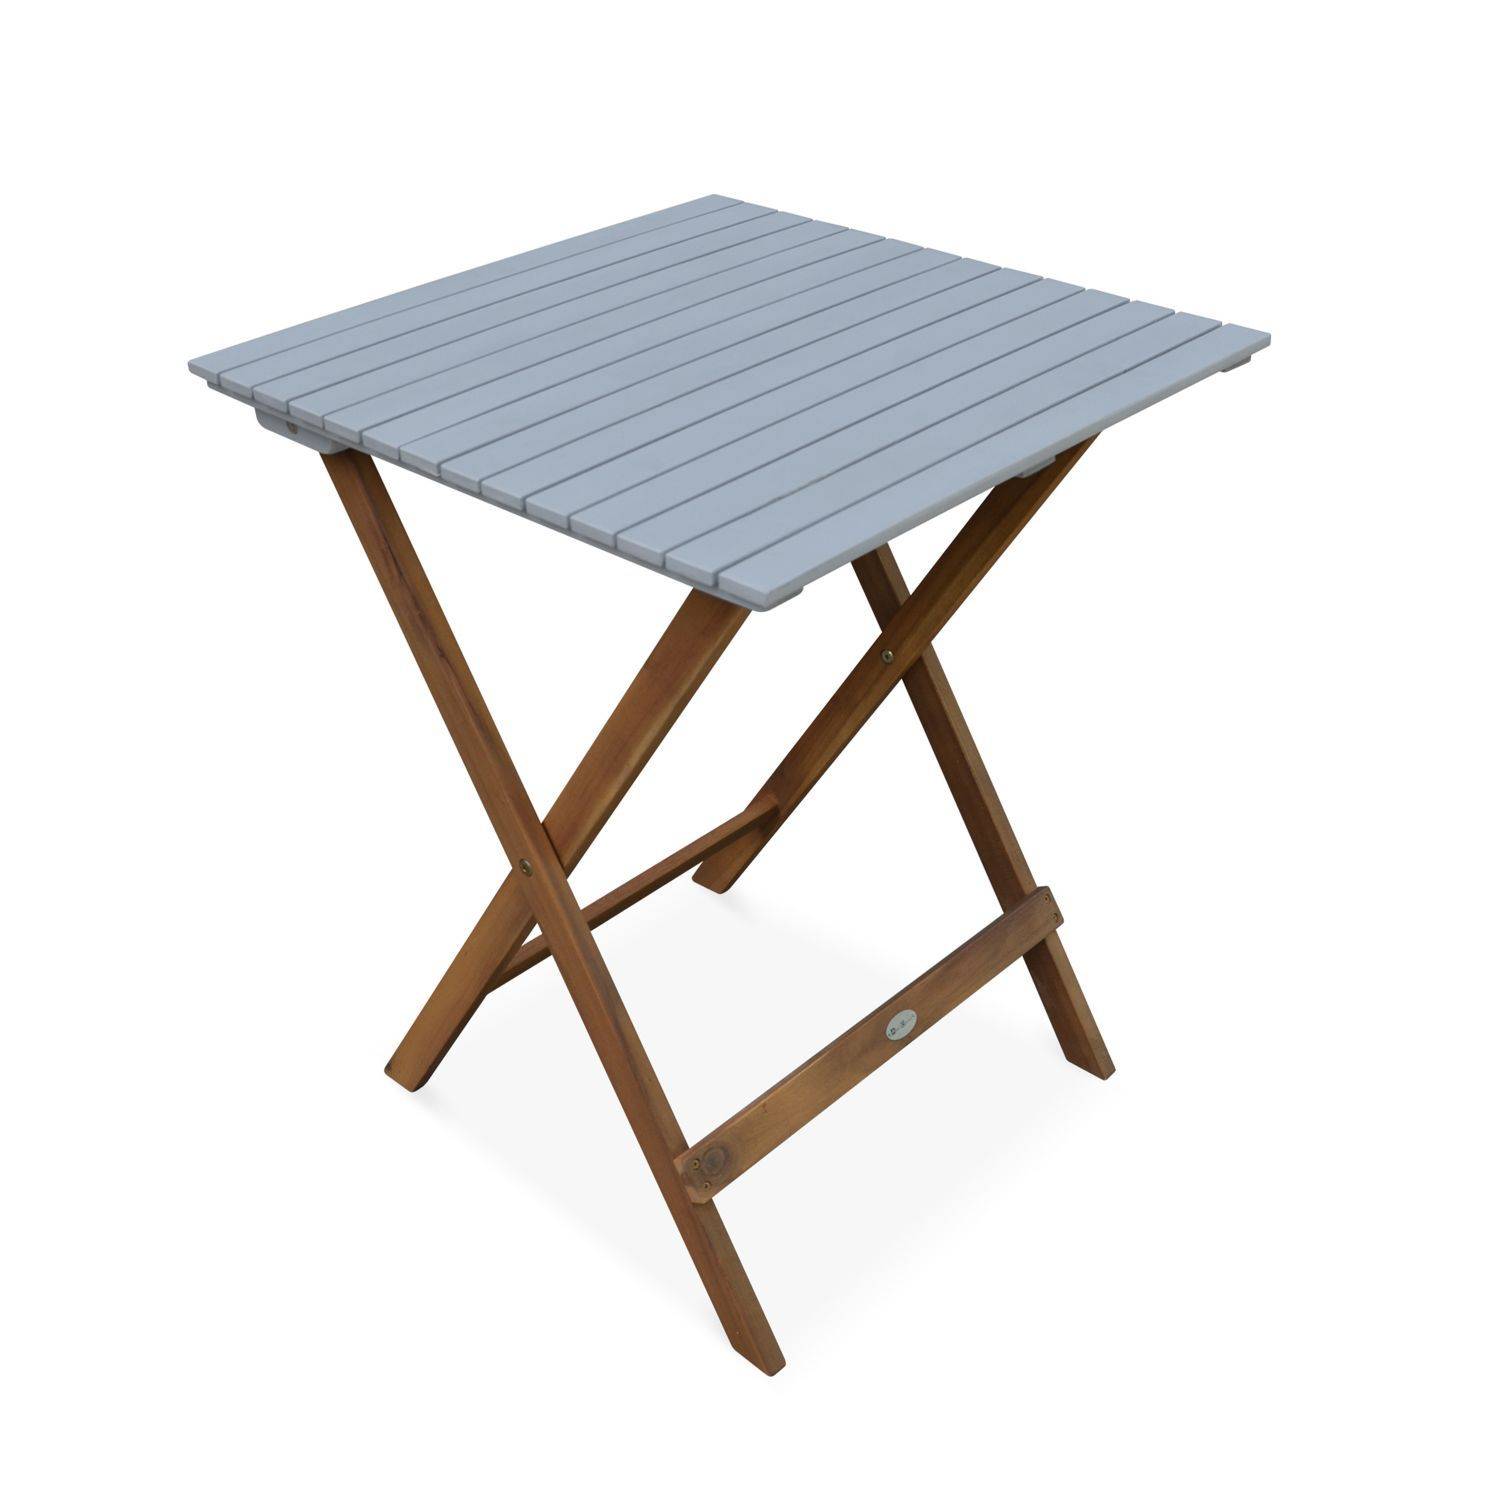 2-seater foldable wooden bistro garden table with chairs, 60x60cm - Barcelona - Light Grey,sweeek,Photo3